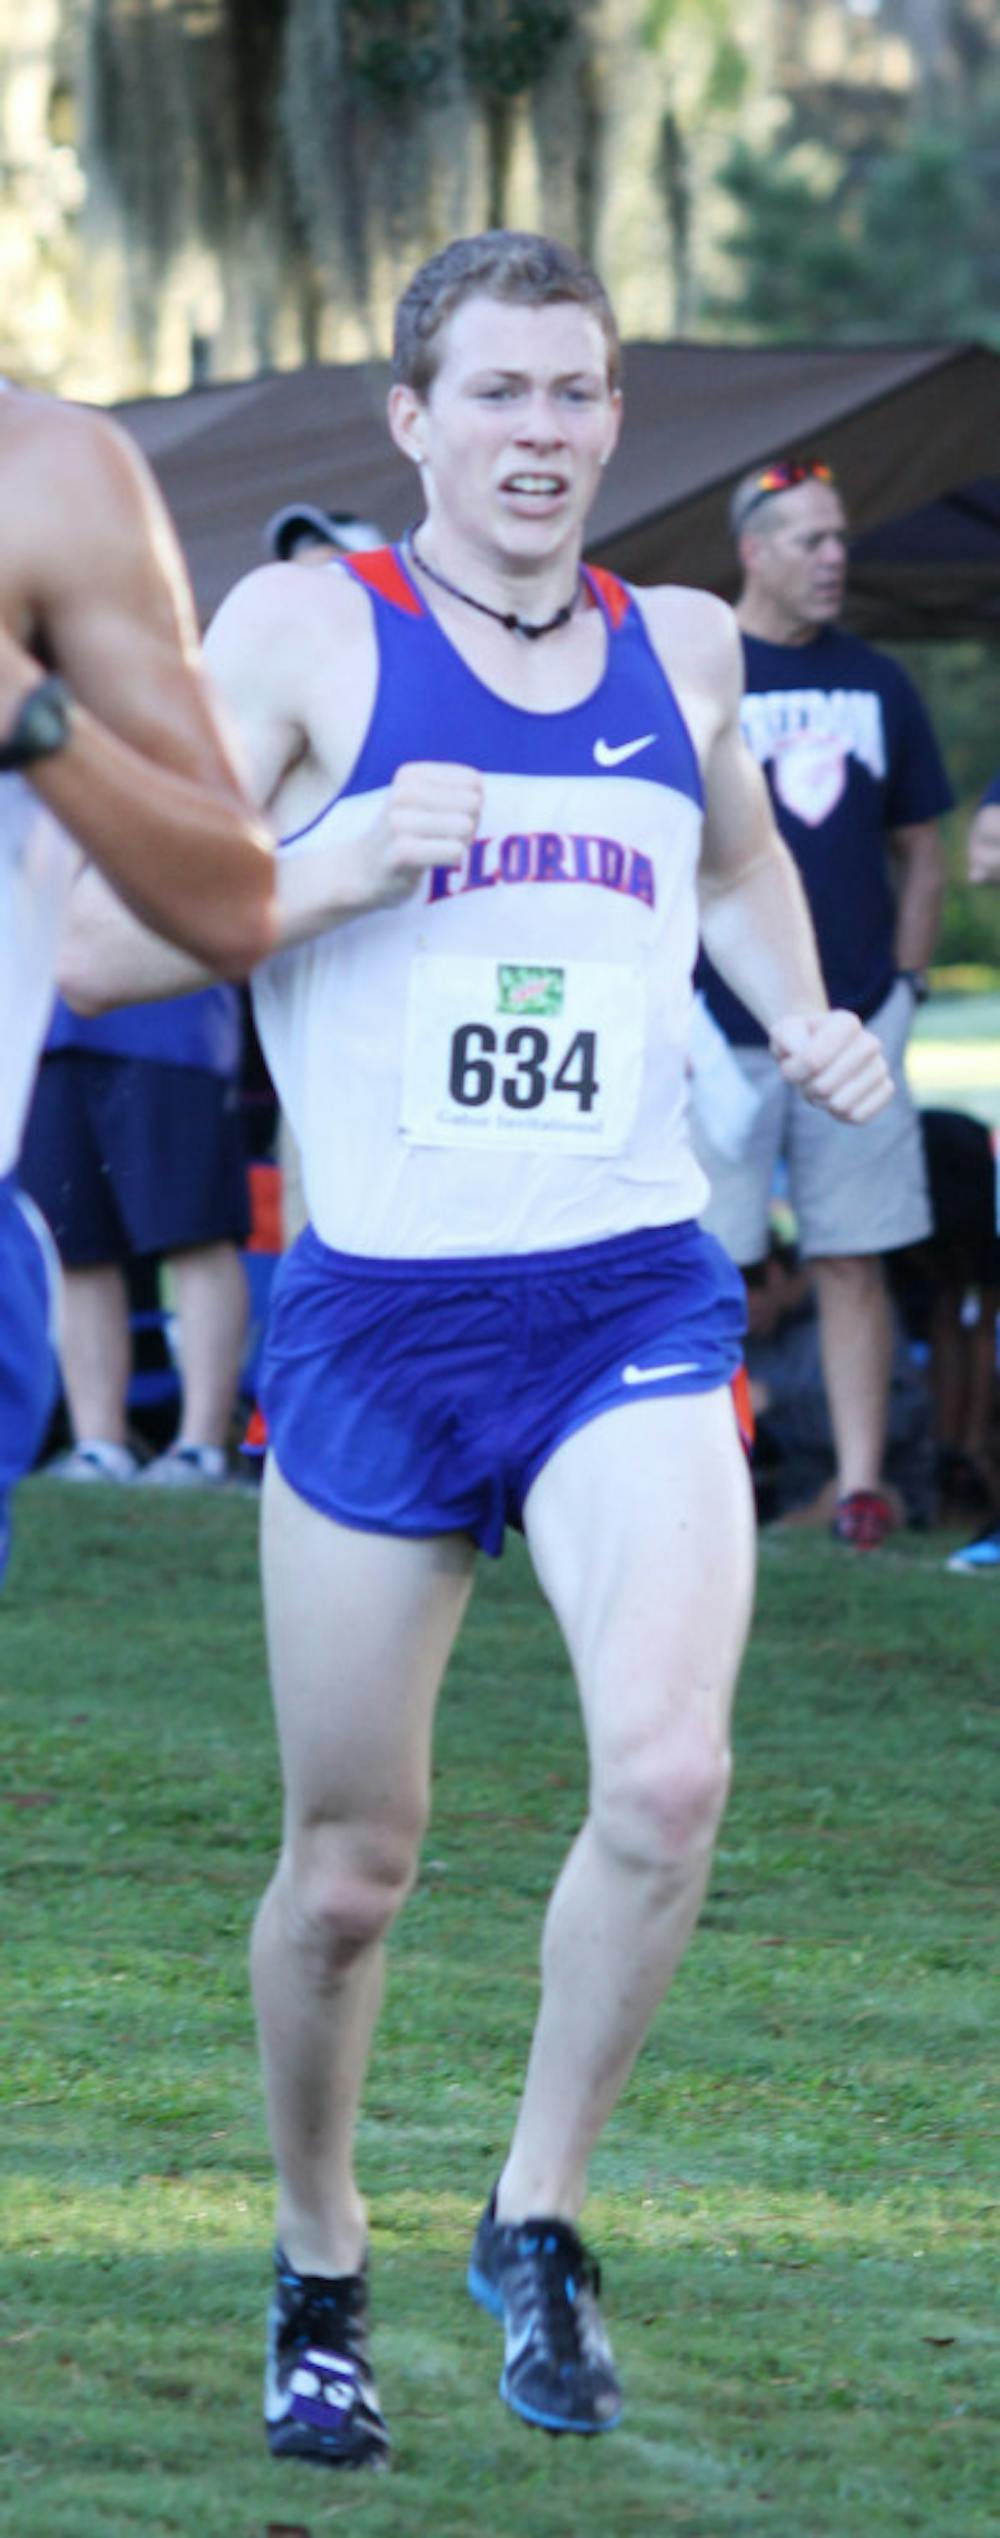 <p>Sophomore runner Phil Duncan posted a career best en route to his first collegiate victory on Saturday at the Saint Leo Cross Country Fall Invitational. The UF men's team finished with four runners in the top 10.</p>